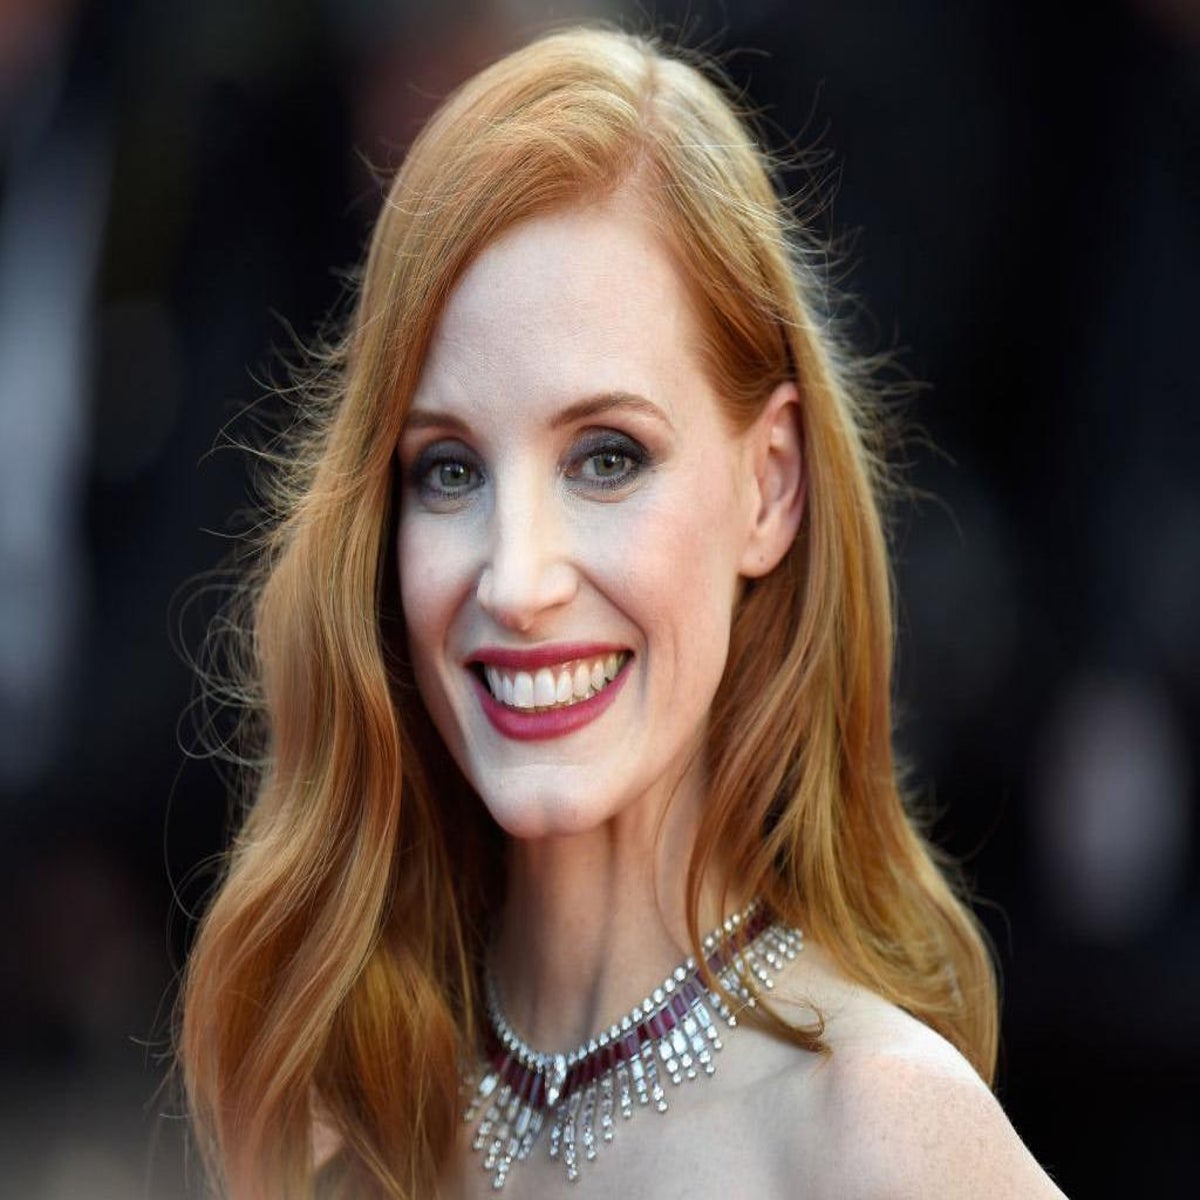 Jessica Chastain Shares First Look at Upcoming All-Female Spy Thriller 355